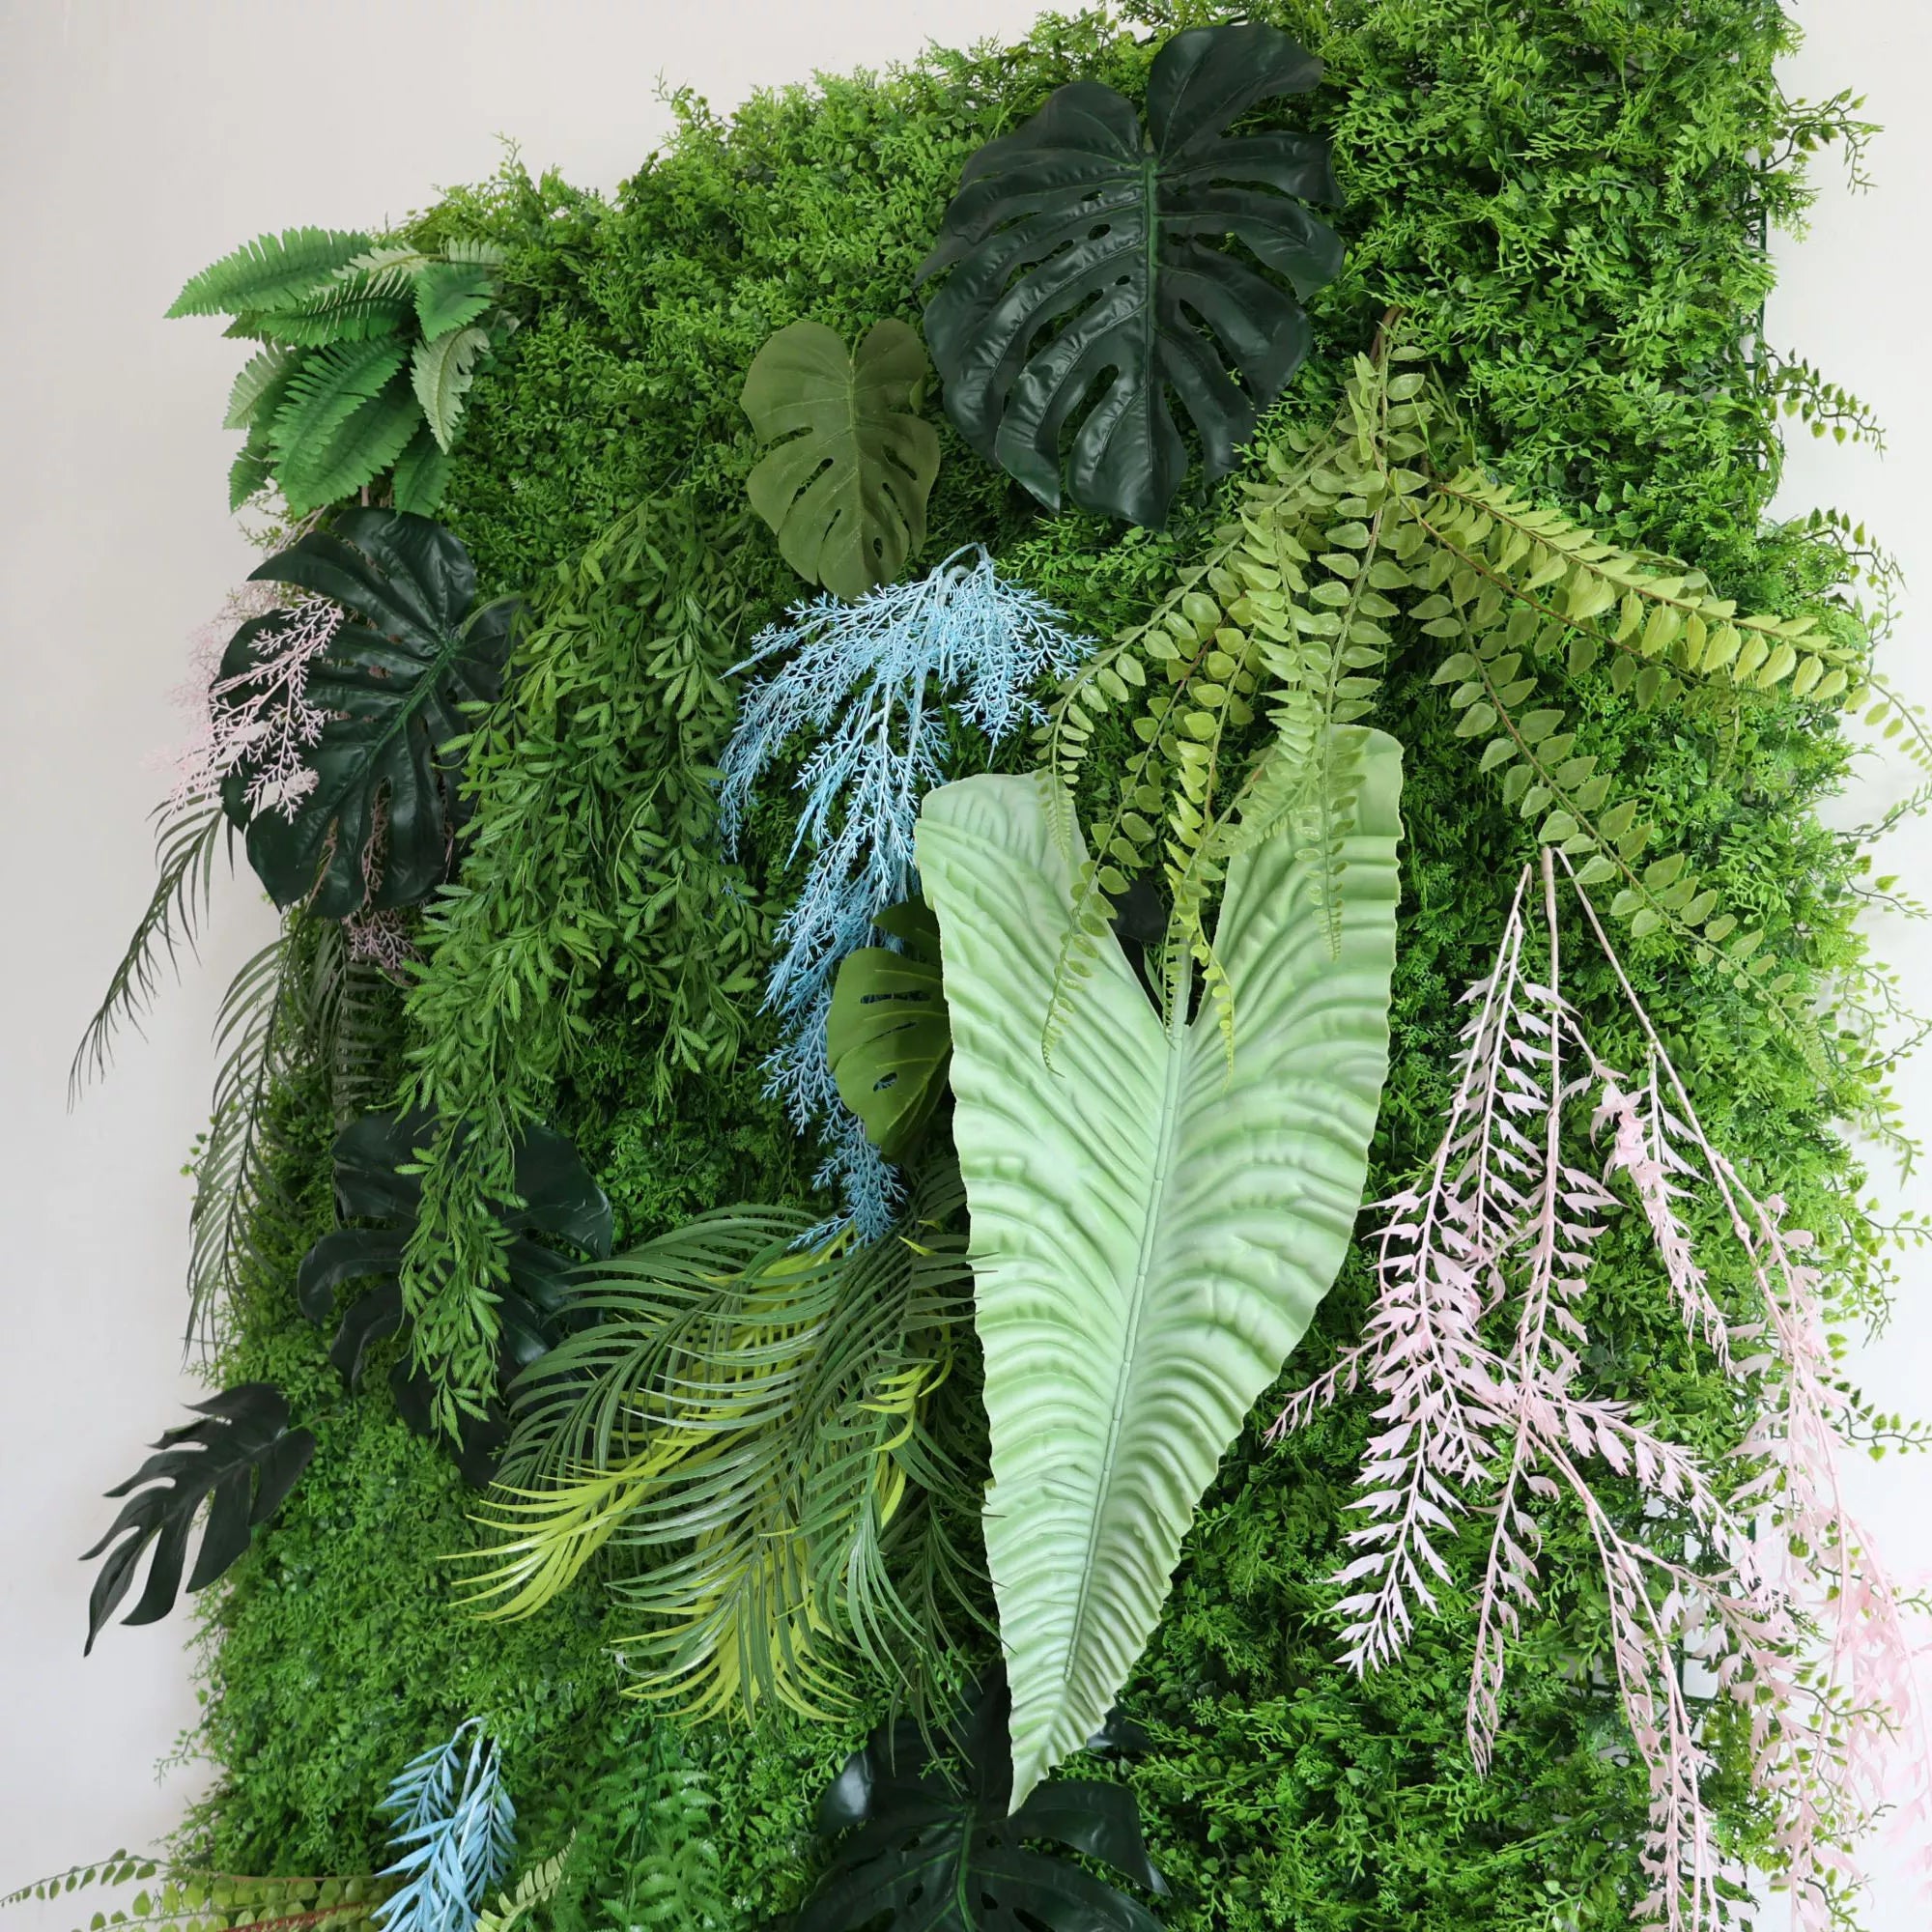 ValarFlower Artificial Floral Wall Backdrop: Enchanted Jungle Wall: A Whimsical Wilderness within Your Reach-VF-281